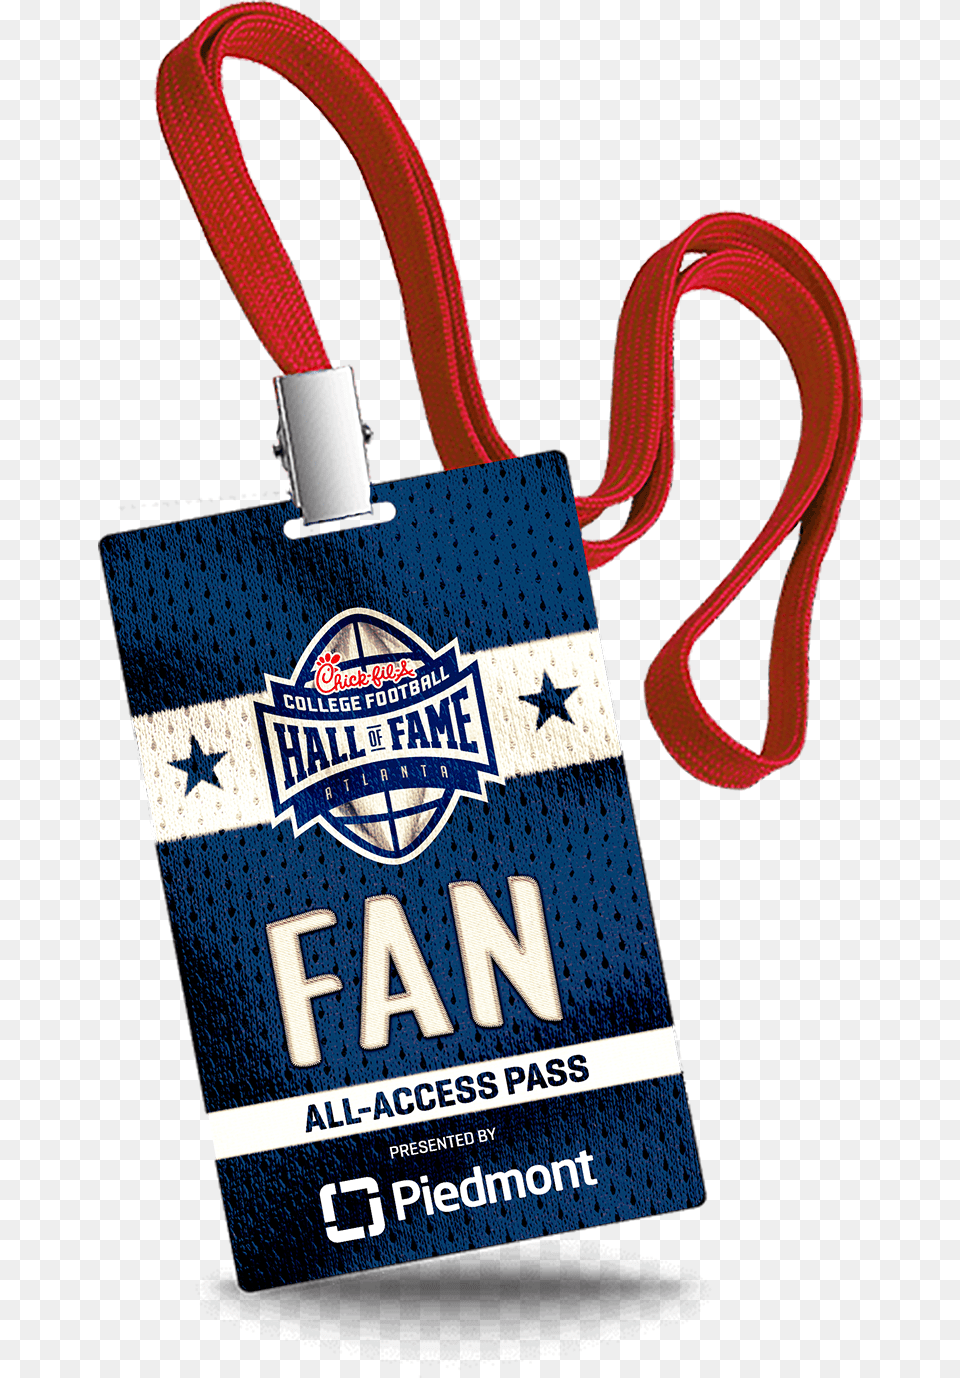 Fan All Access Pass College Football Hall Of Fame Pass, Bag, Text, Accessories, Handbag Png Image